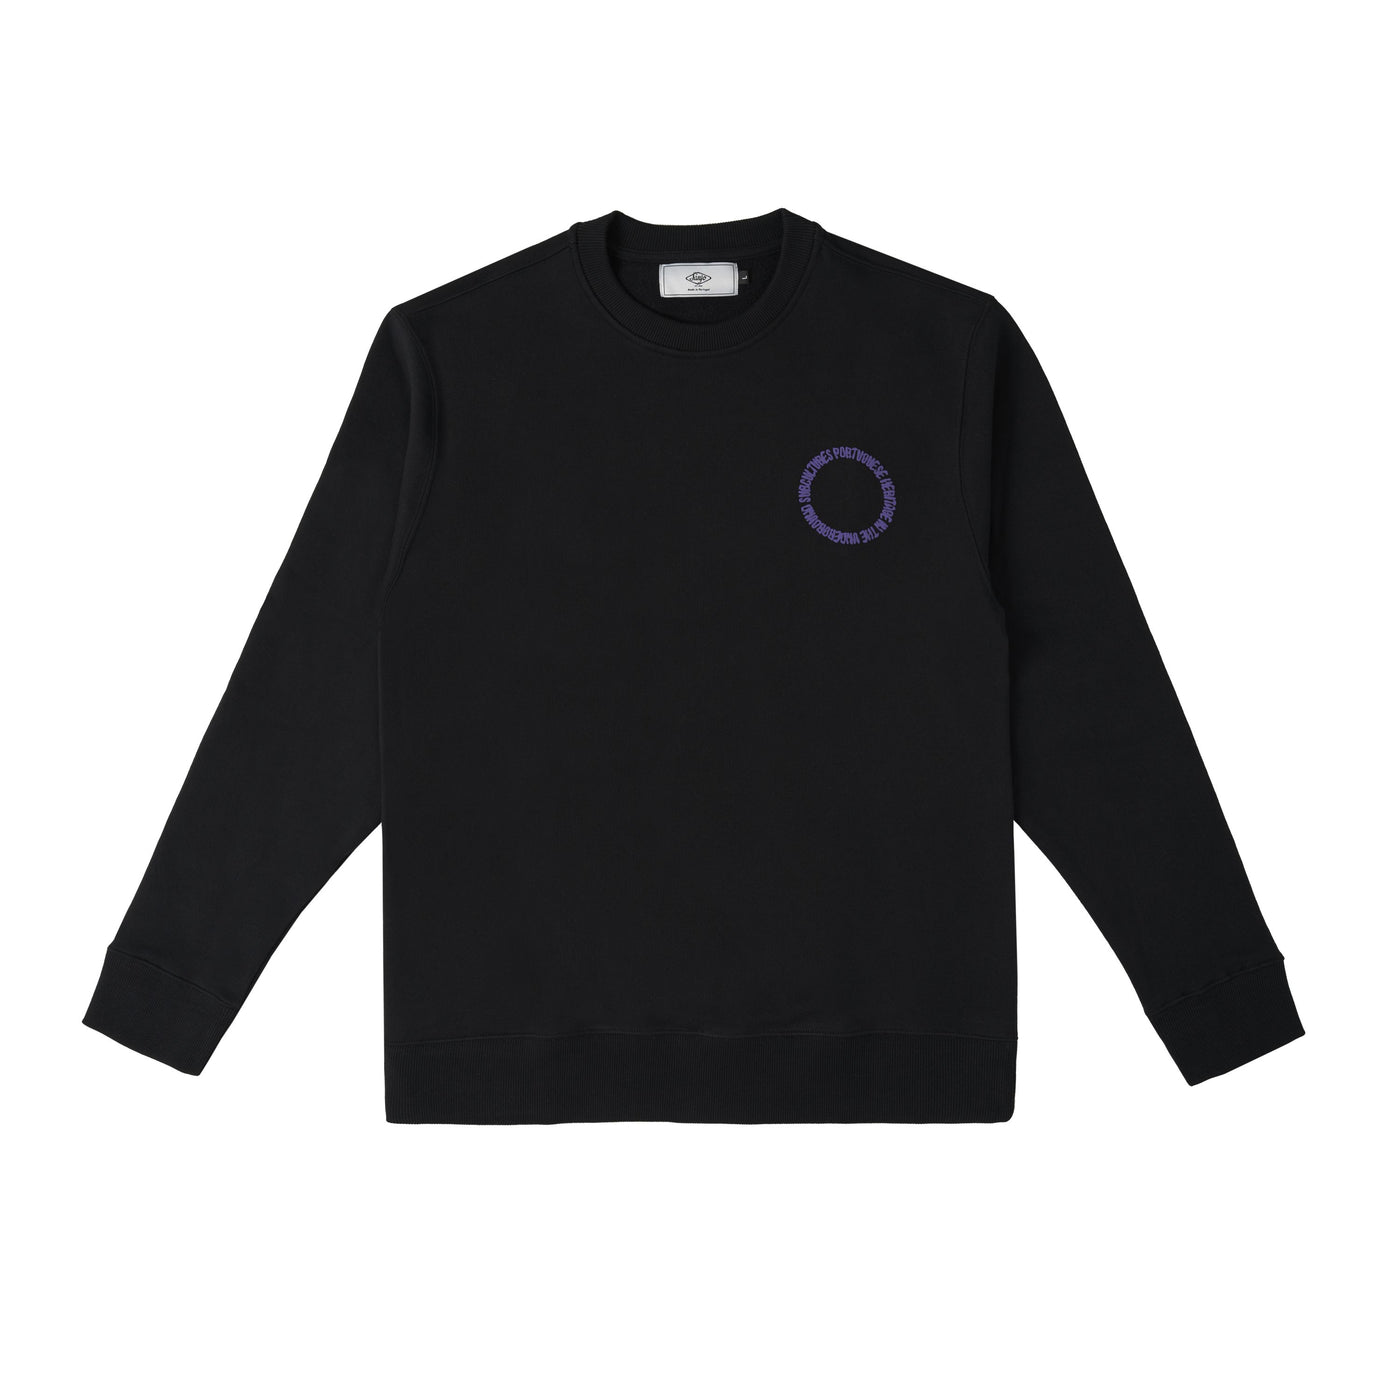 Sanjo Subcultures Sweater // Black